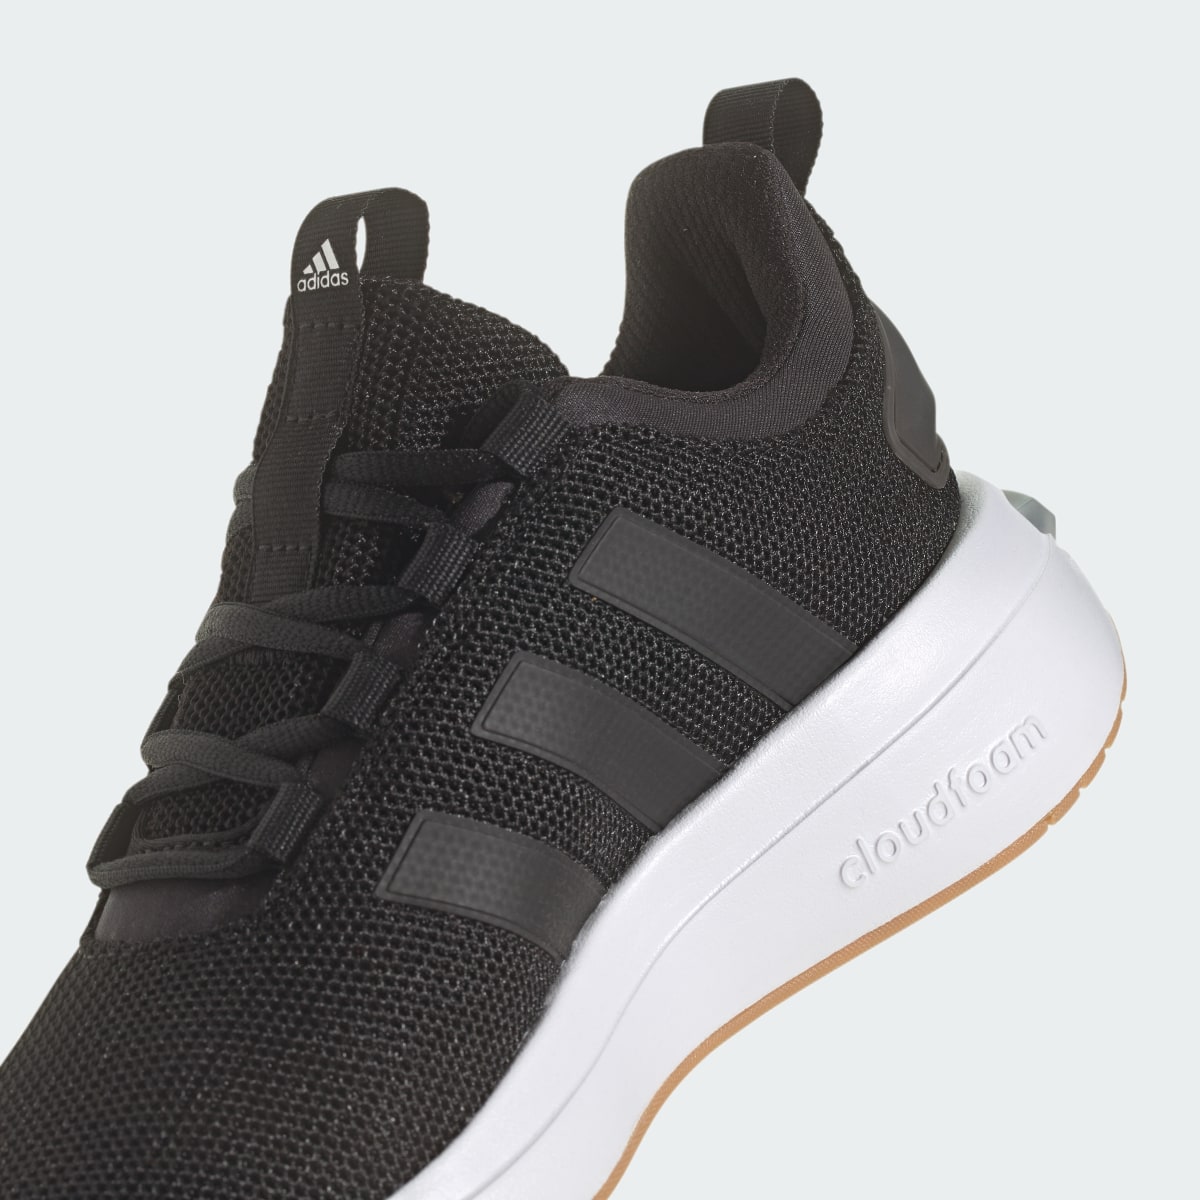 Adidas Racer TR23 Shoes. 10